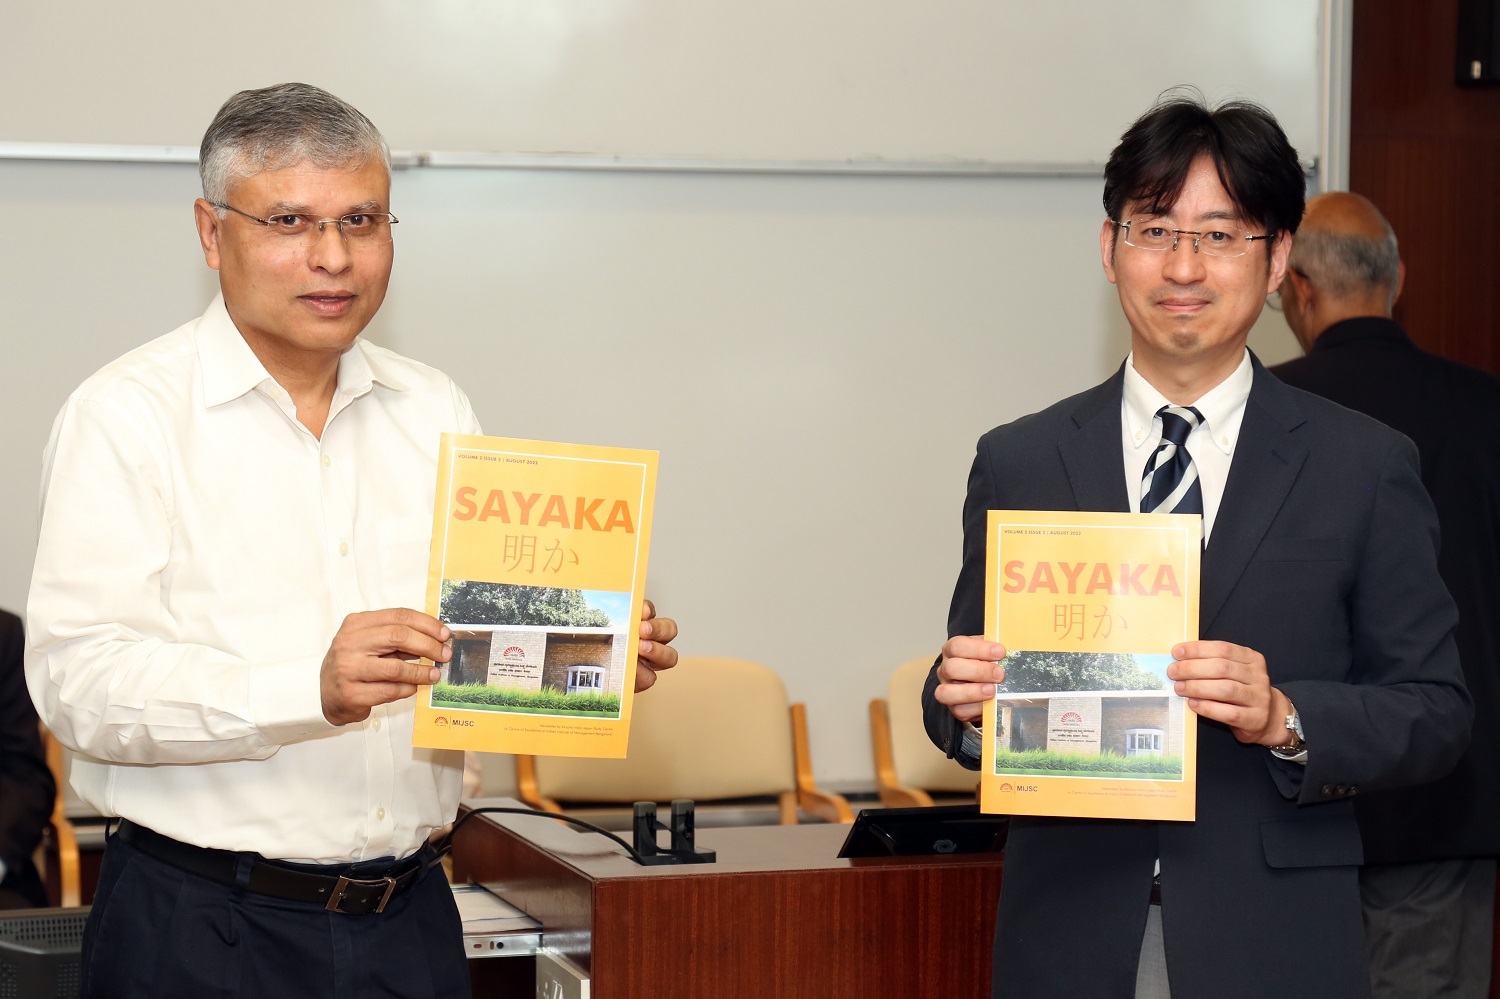 Prof. D Krishna Sundar, Chairperson, Mizuho India-Japan Study Centre and Toshihiro Mizutani, Director General of JETRO, declare a volume of the MIJSC newsletter officially open.